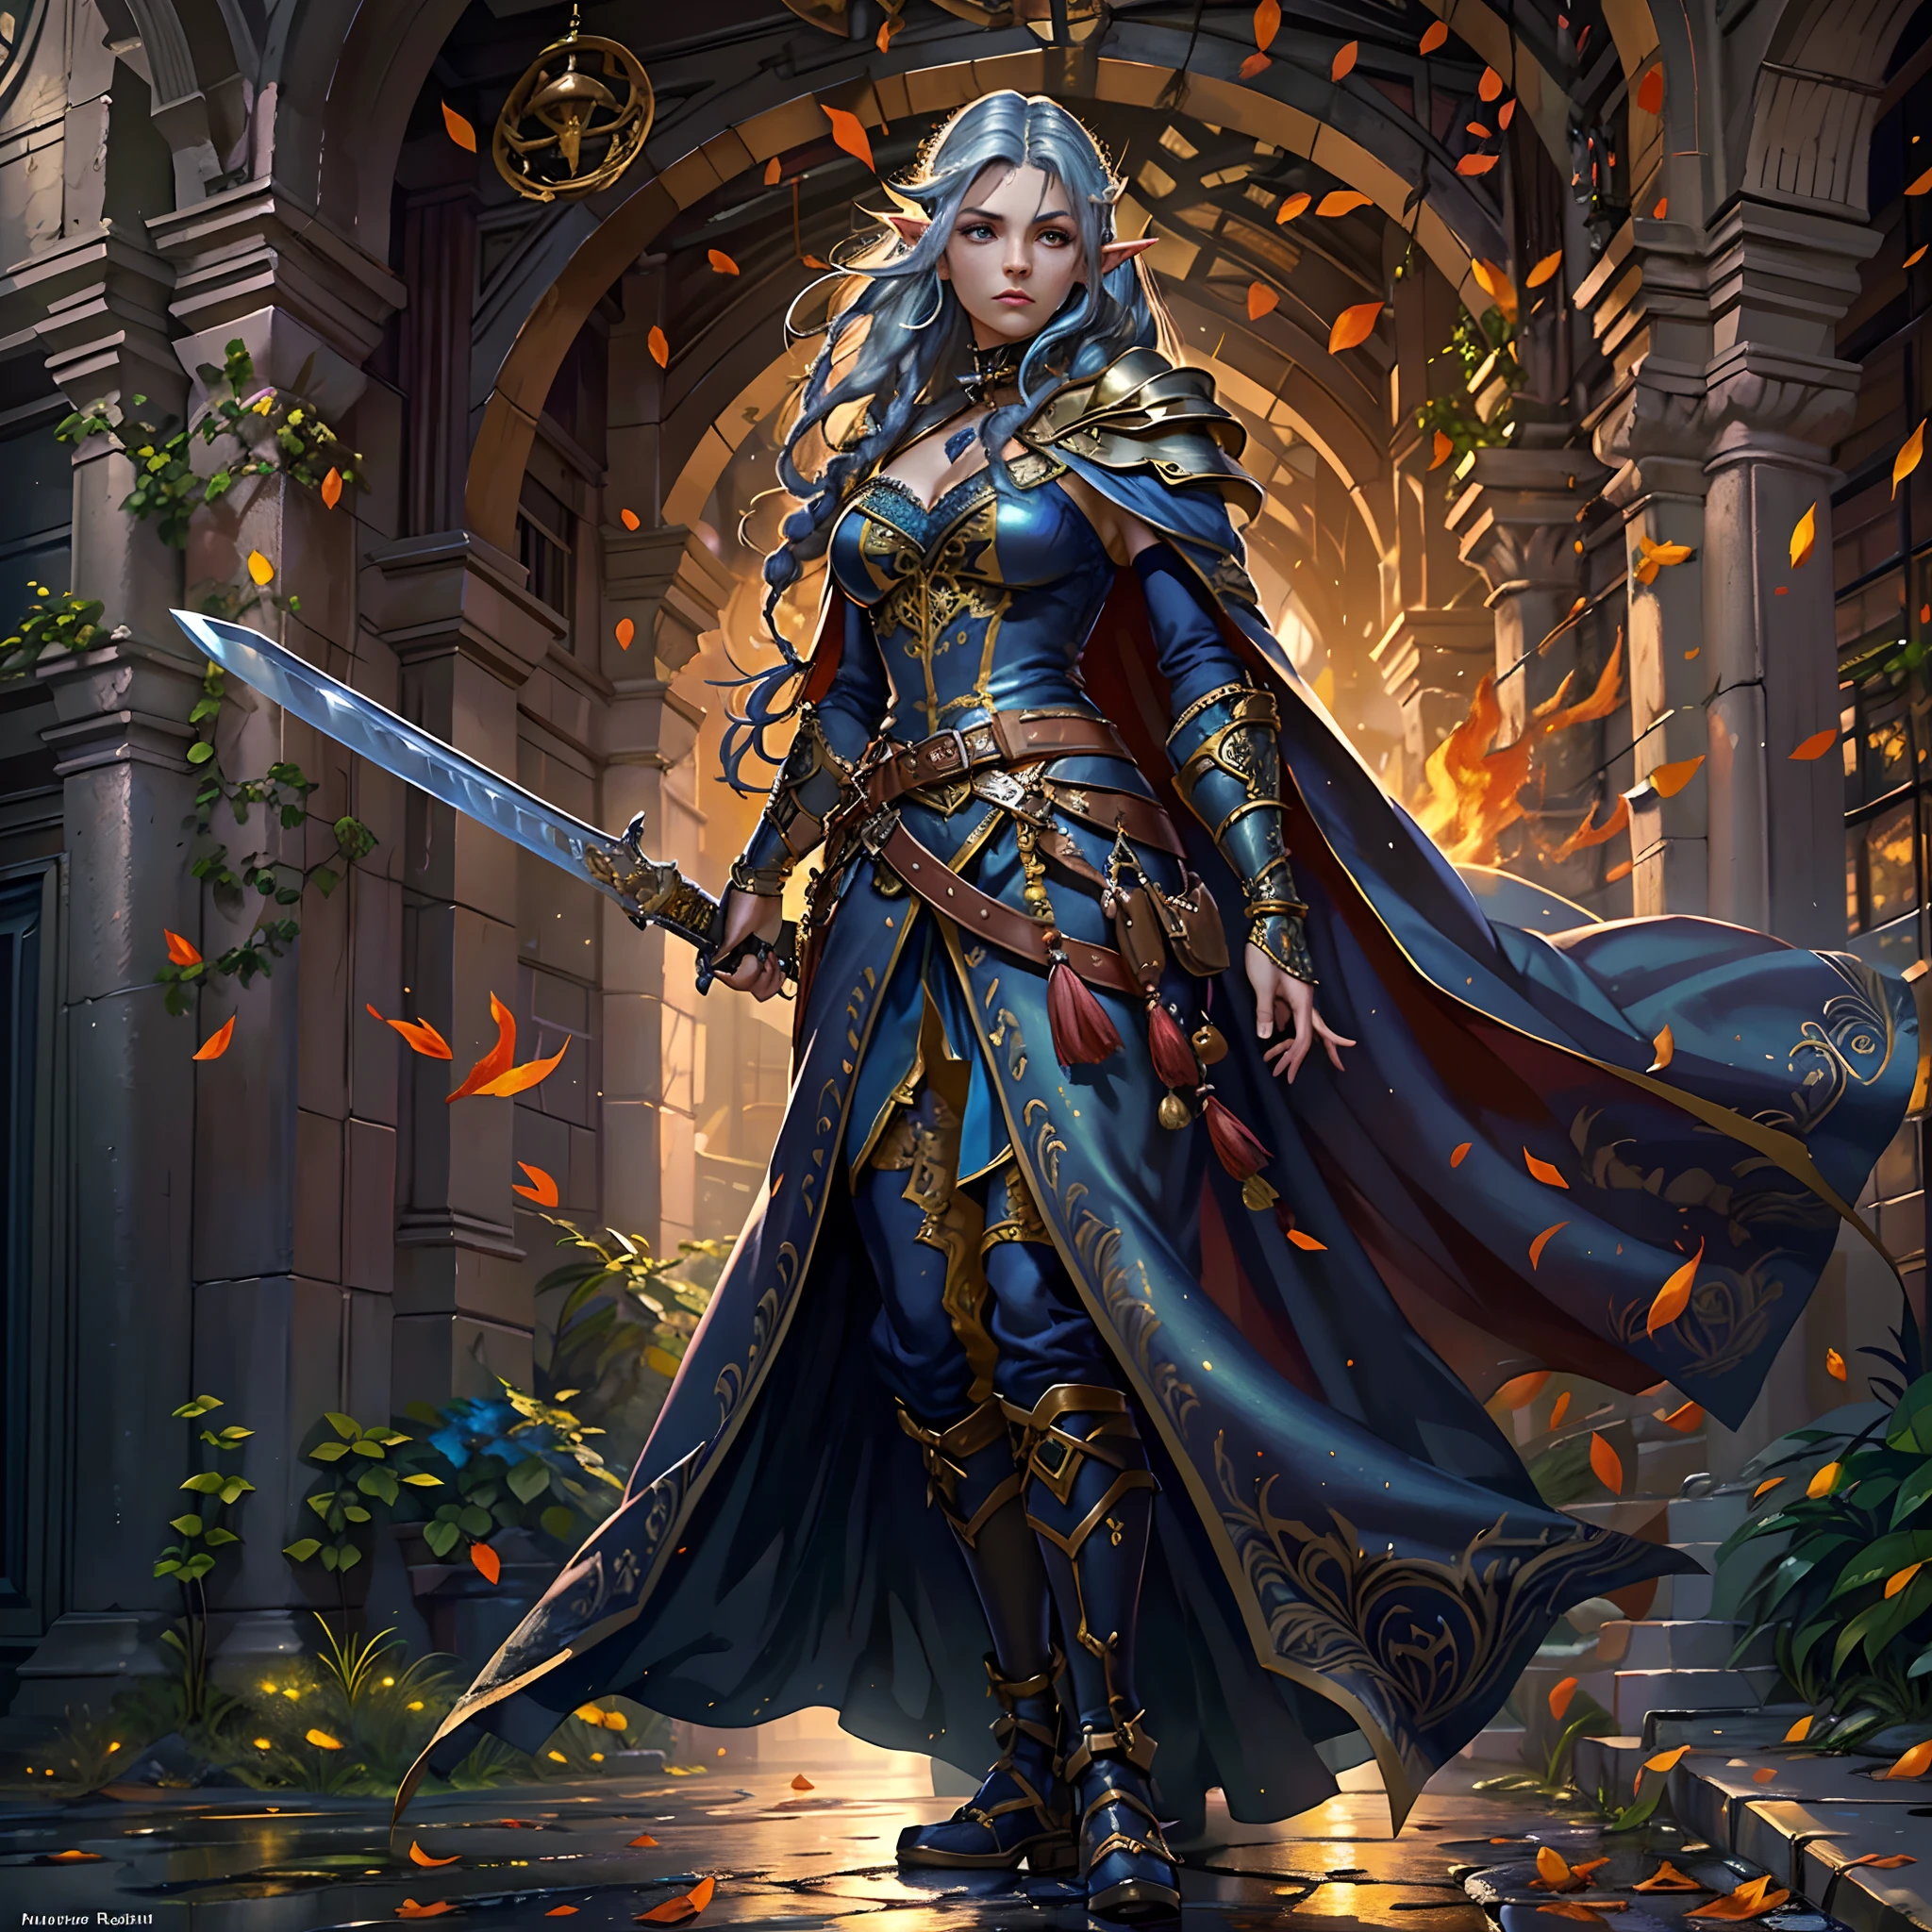 a picture of a female elf (intense details, Masterpiece, best quality: 1.5) fantasy swashbuckler, fantasy fencer, armed with a slim sword, shinning sword, metallic shine, colorful clothes, an ultra wide shot, full body (intense details, Masterpiece, best quality: 1.5)epic beautiful female elf (intense details, Masterpiece, best quality: 1.5), [[anatomically correct]],  rich hair, braided hair, long hair, small pointed ears, fantasy urban street (intense details, Masterpiece, best quality: 1.5),  purple cloak  (intense details, Masterpiece, best quality: 1.5), long cloak (intense details, Masterpiece, best quality: 1.5), elven leather armor (intense details, Masterpiece, best quality: 1.5) sense of daring, sense of adventure, controlling a swirling fiery, red radiant magic (1.5 intricate details, Masterpiece, best quality),high details, best quality, 8k, [ultra detailed], masterpiece, best quality, (extremely detailed), dynamic angle, ultra wide shot, photorealistic, RAW, fantasy art, dnd art,fantasy art, realistic art,